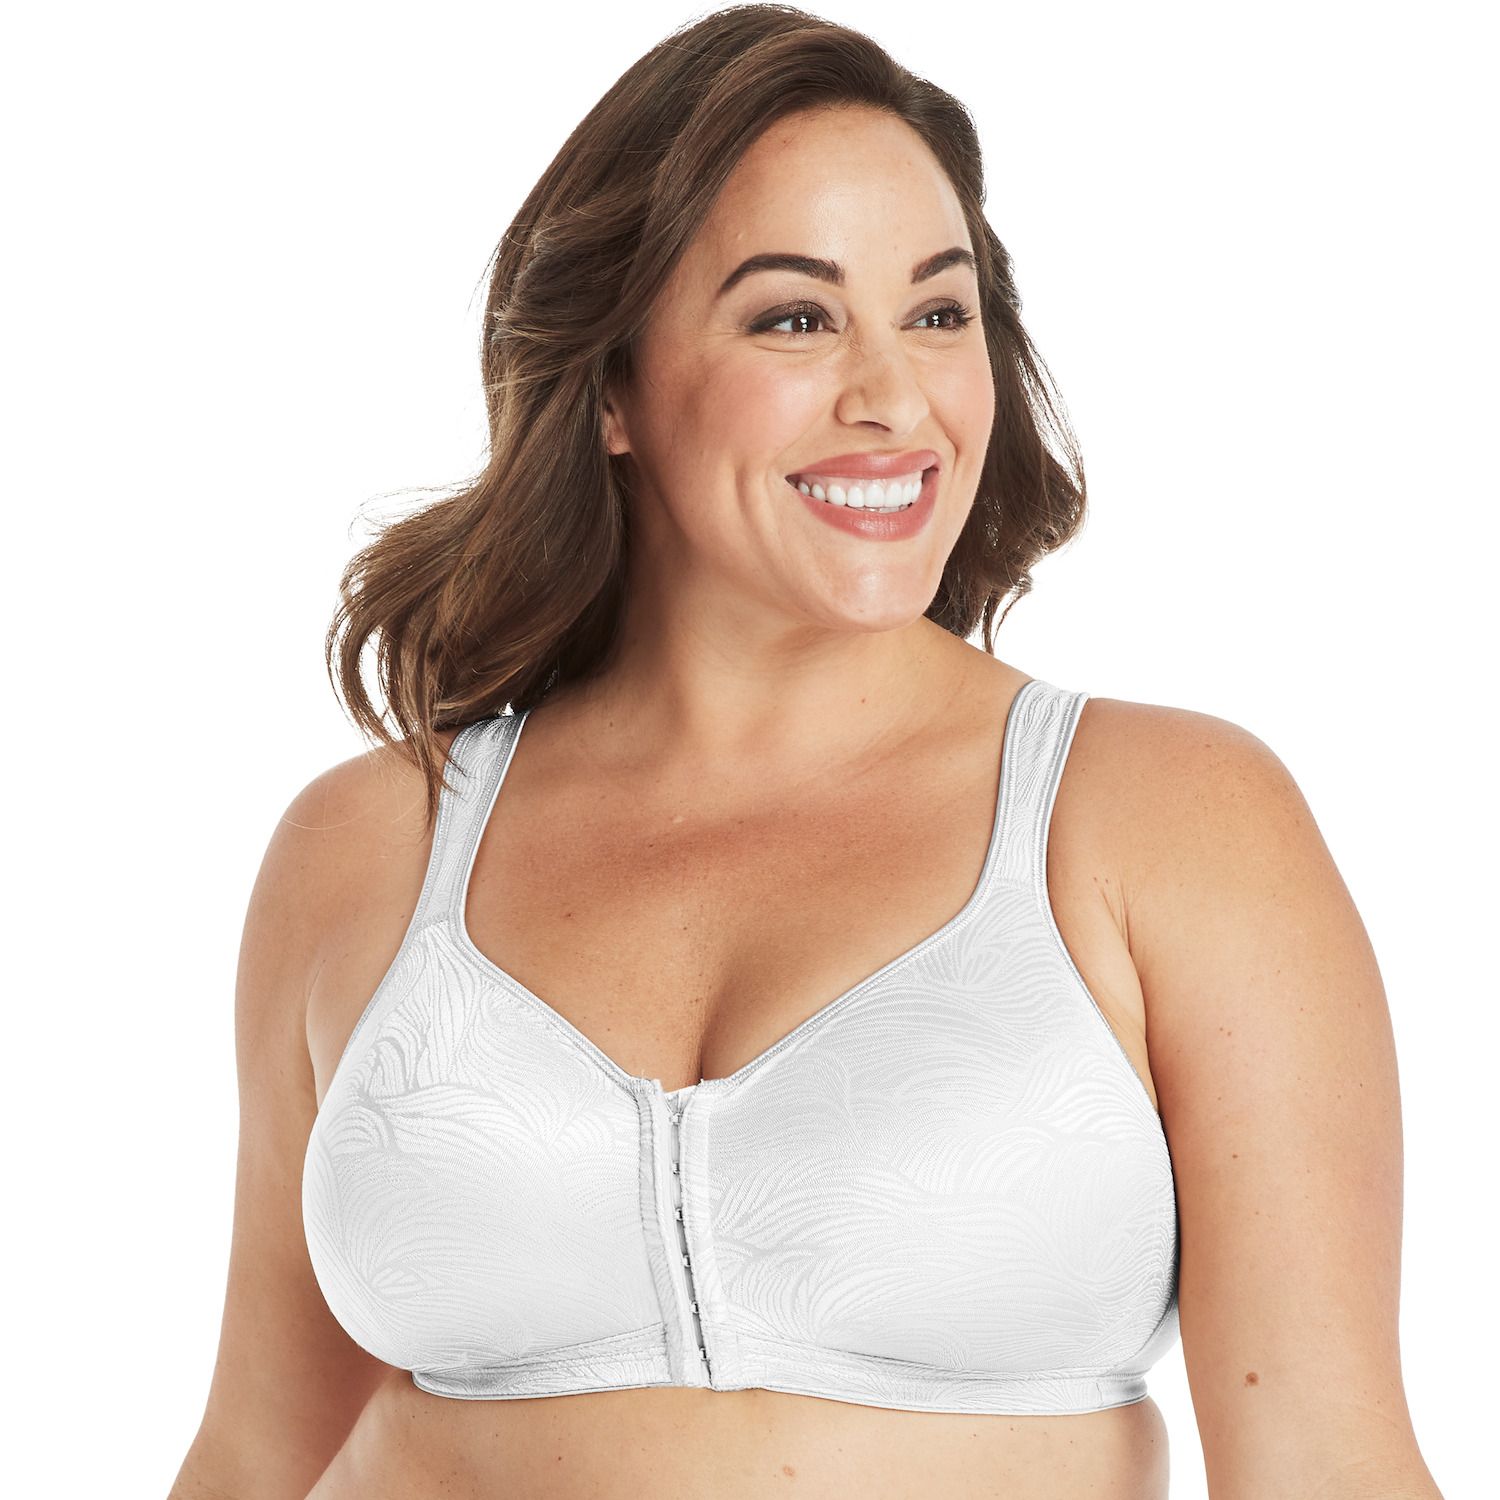 latex free bras at kohl's Off 58% 